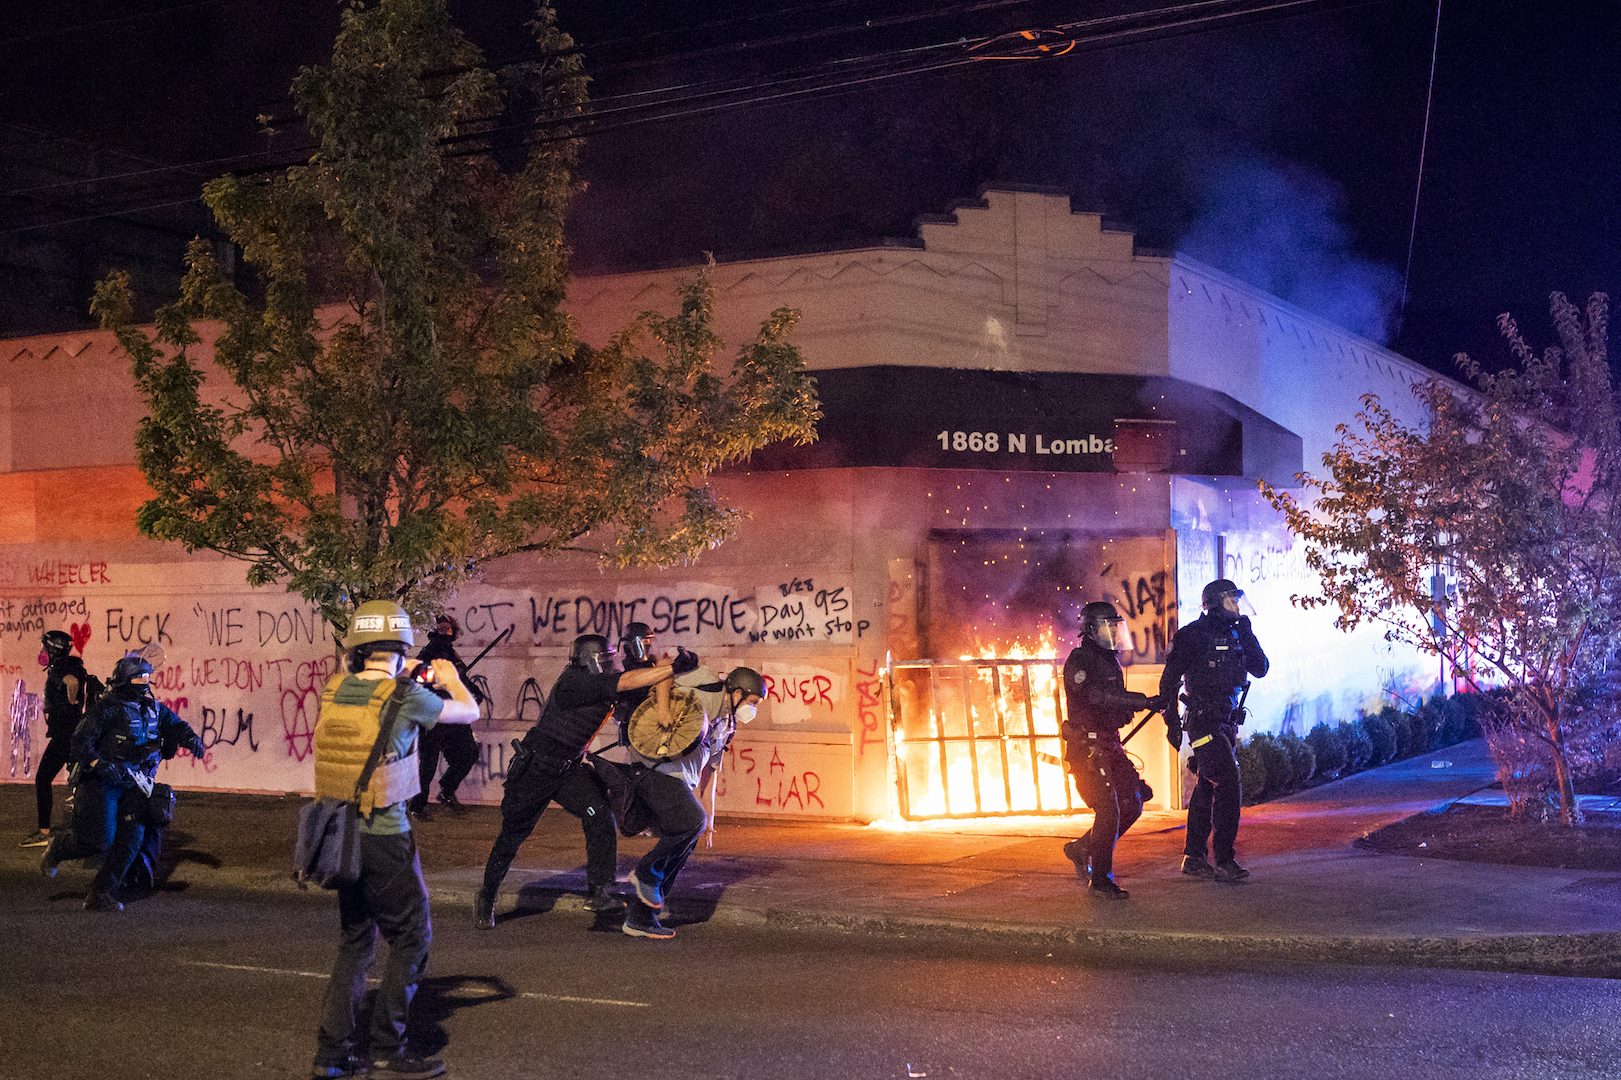 Portland Rioters Smash Windows, Break Into Business During March to Mayor’s Home